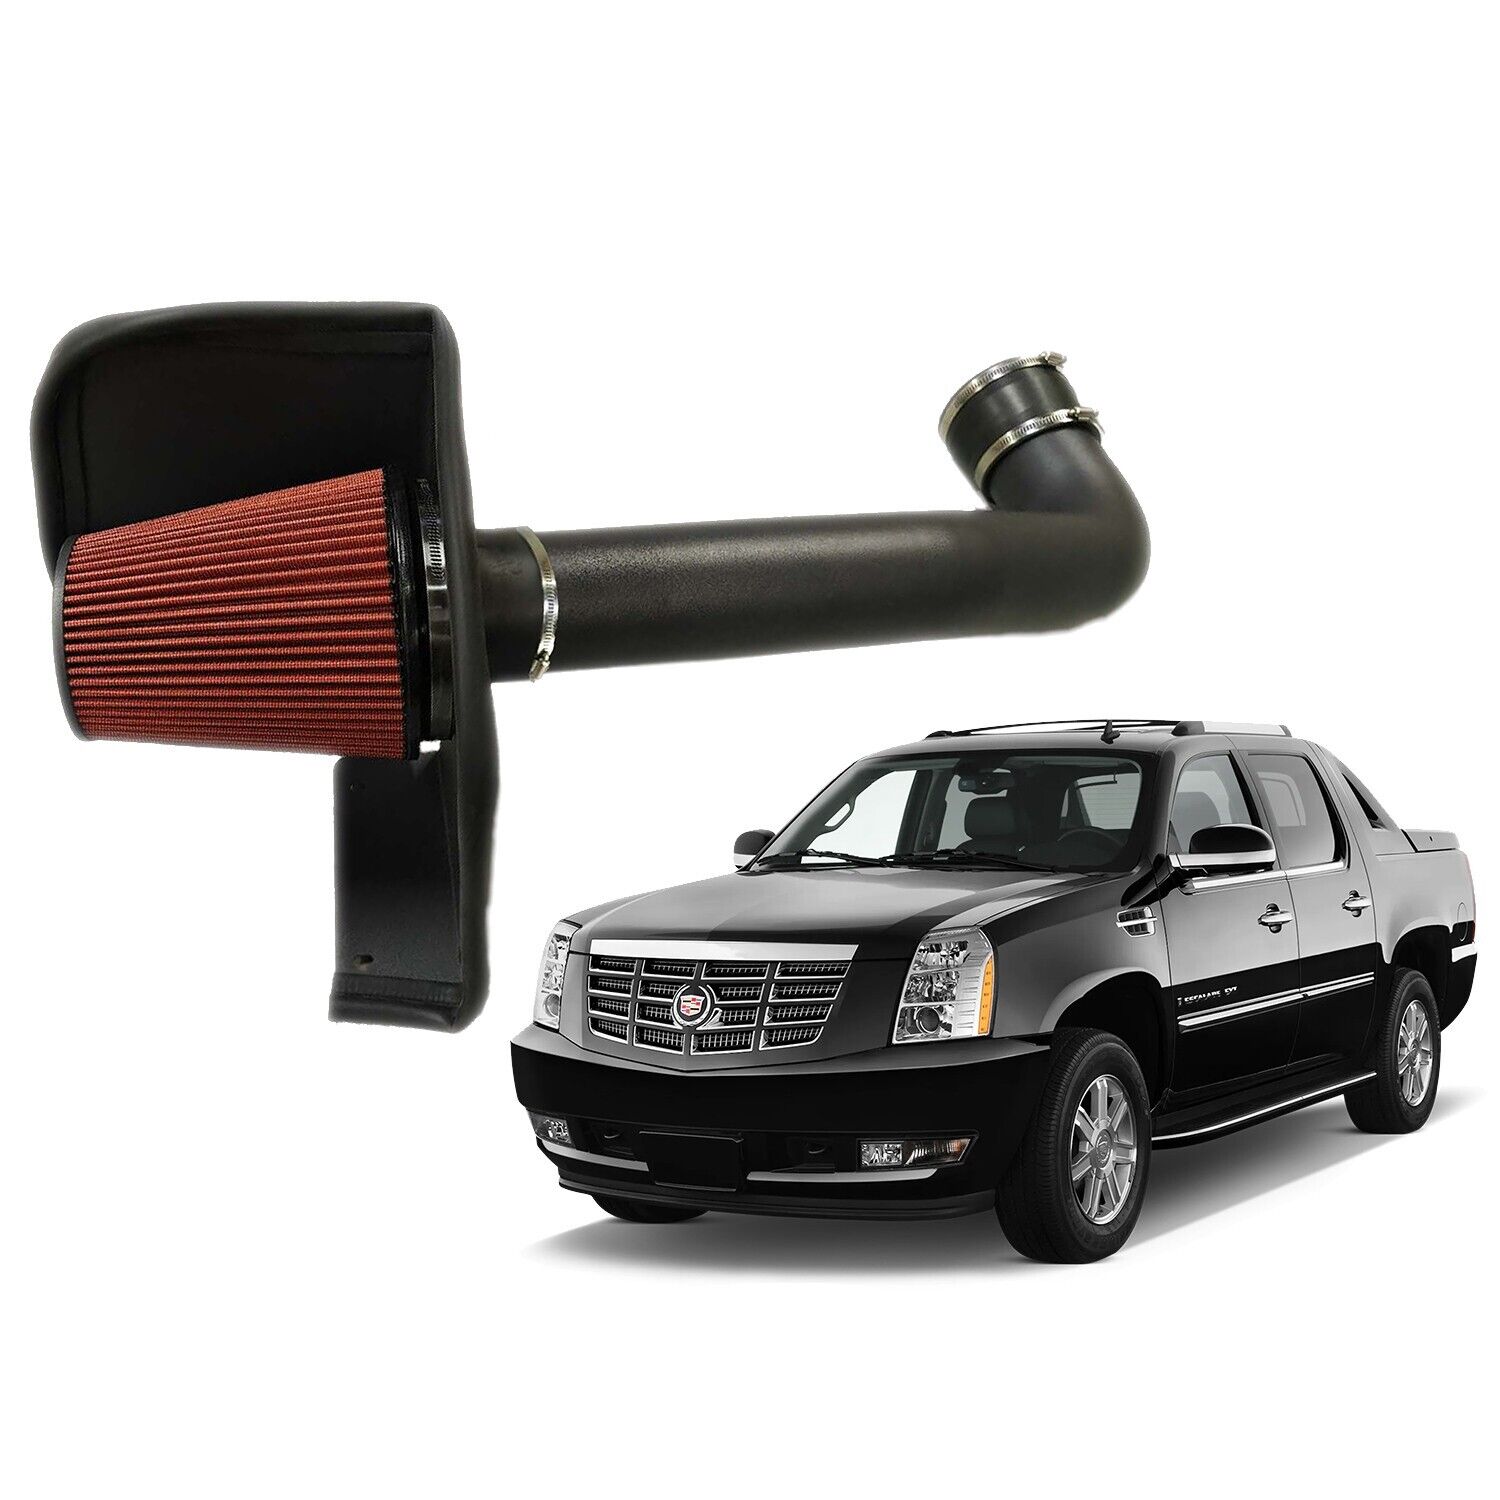 Air Intake + Heat Shield for 2009-2013 Cadillac Escalade EXT with 6.2L V8 Engine